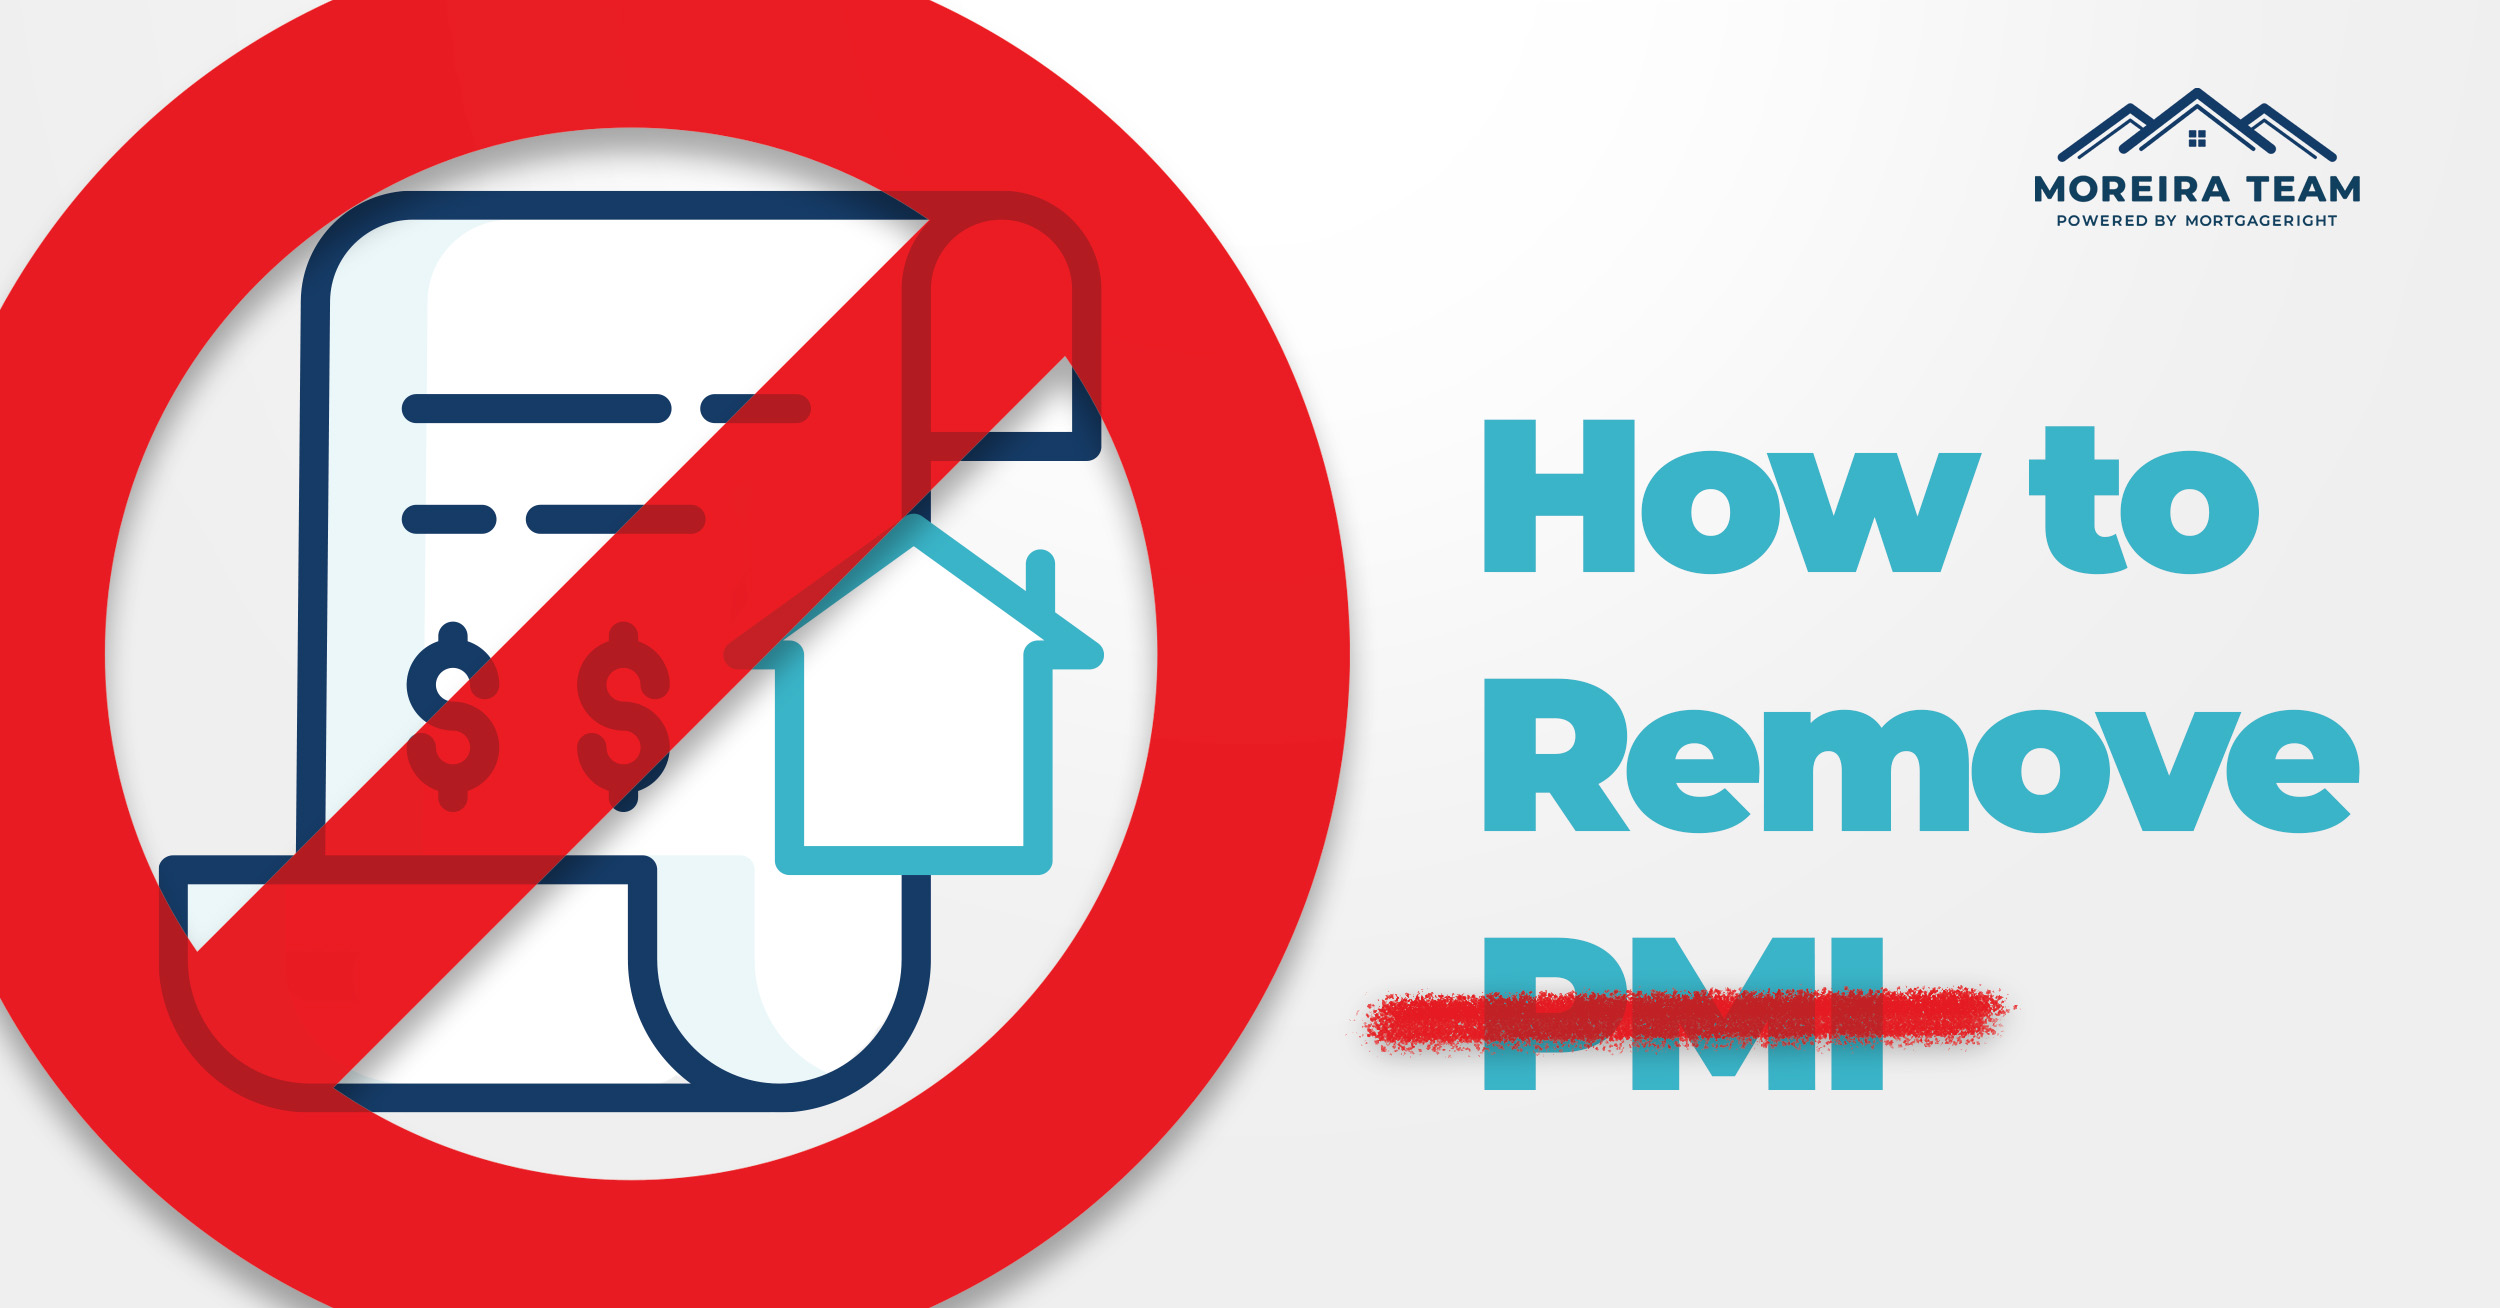 How to Remove PMI: Get Rid of Conventional PMI or FHA MIP